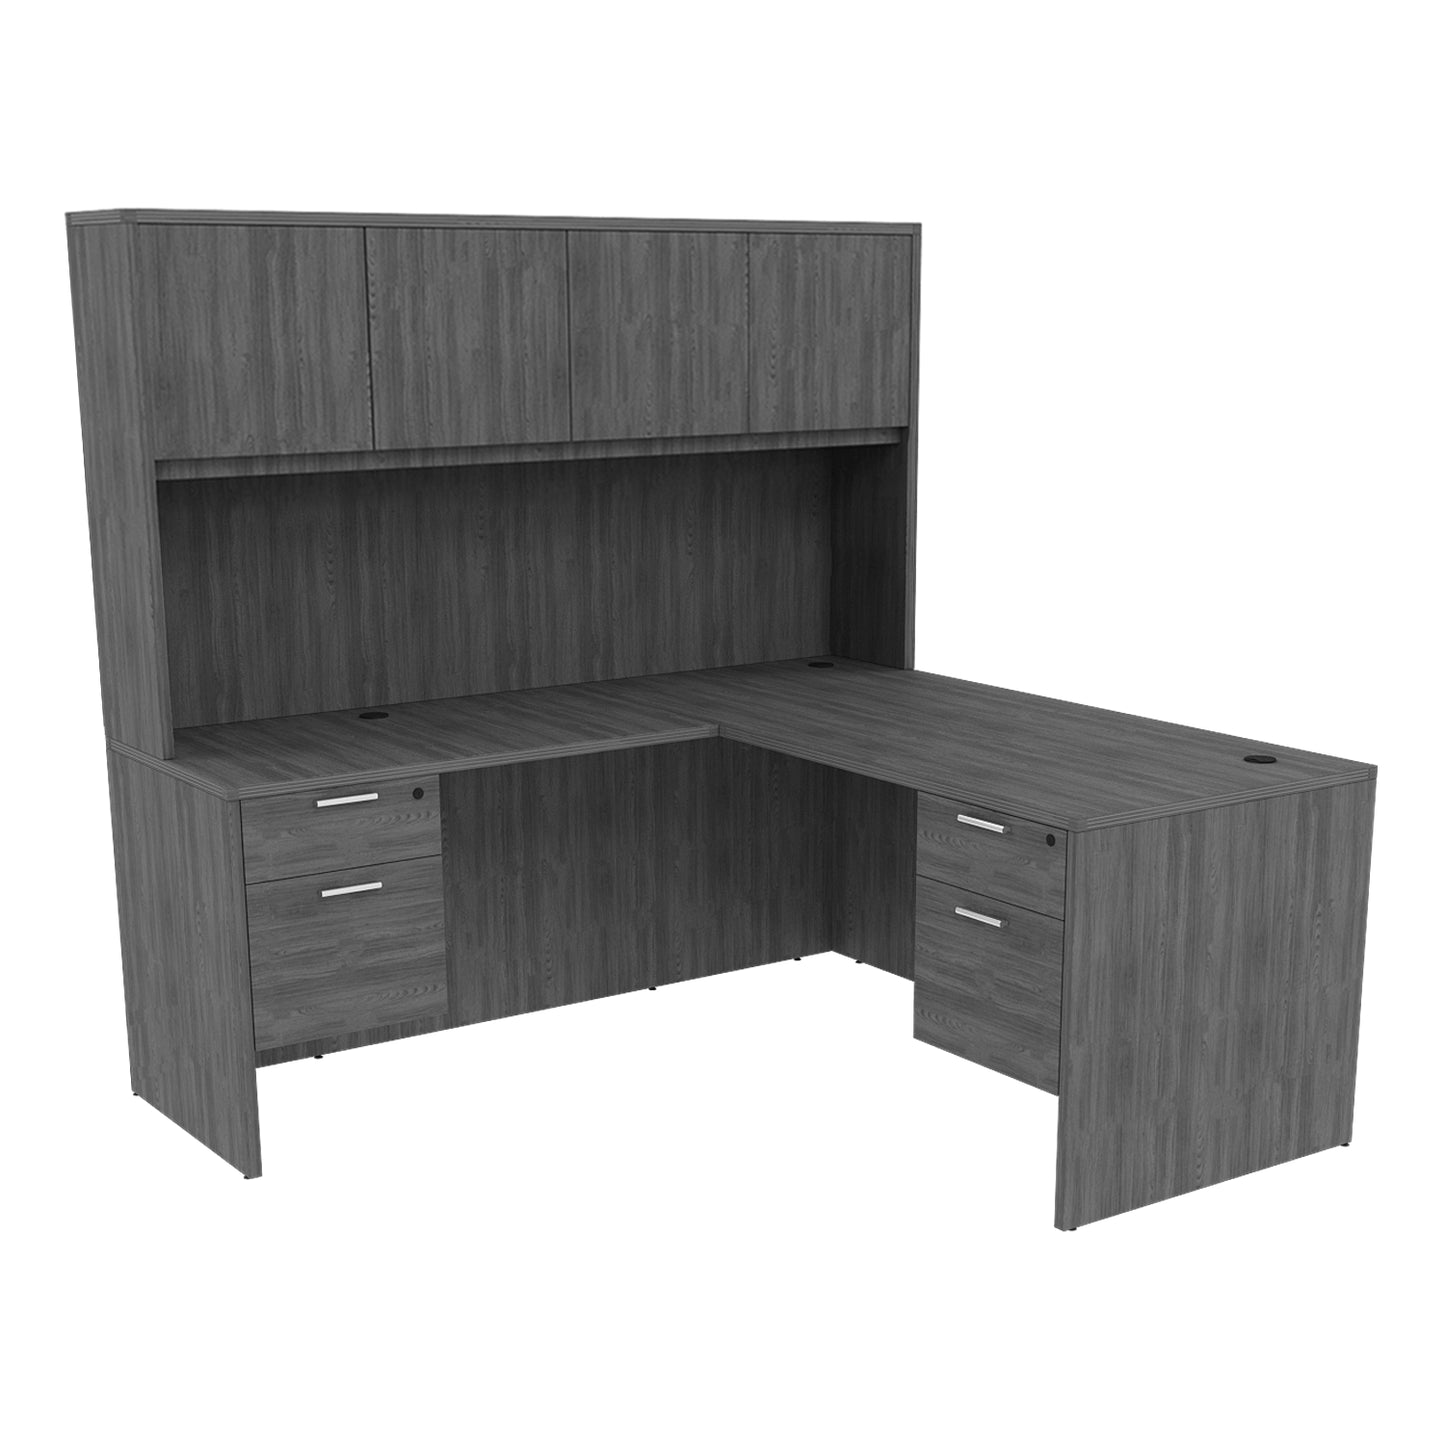 Kai L-Shaped Desk with Double Suspended Pedestals & 4 Door Hutch